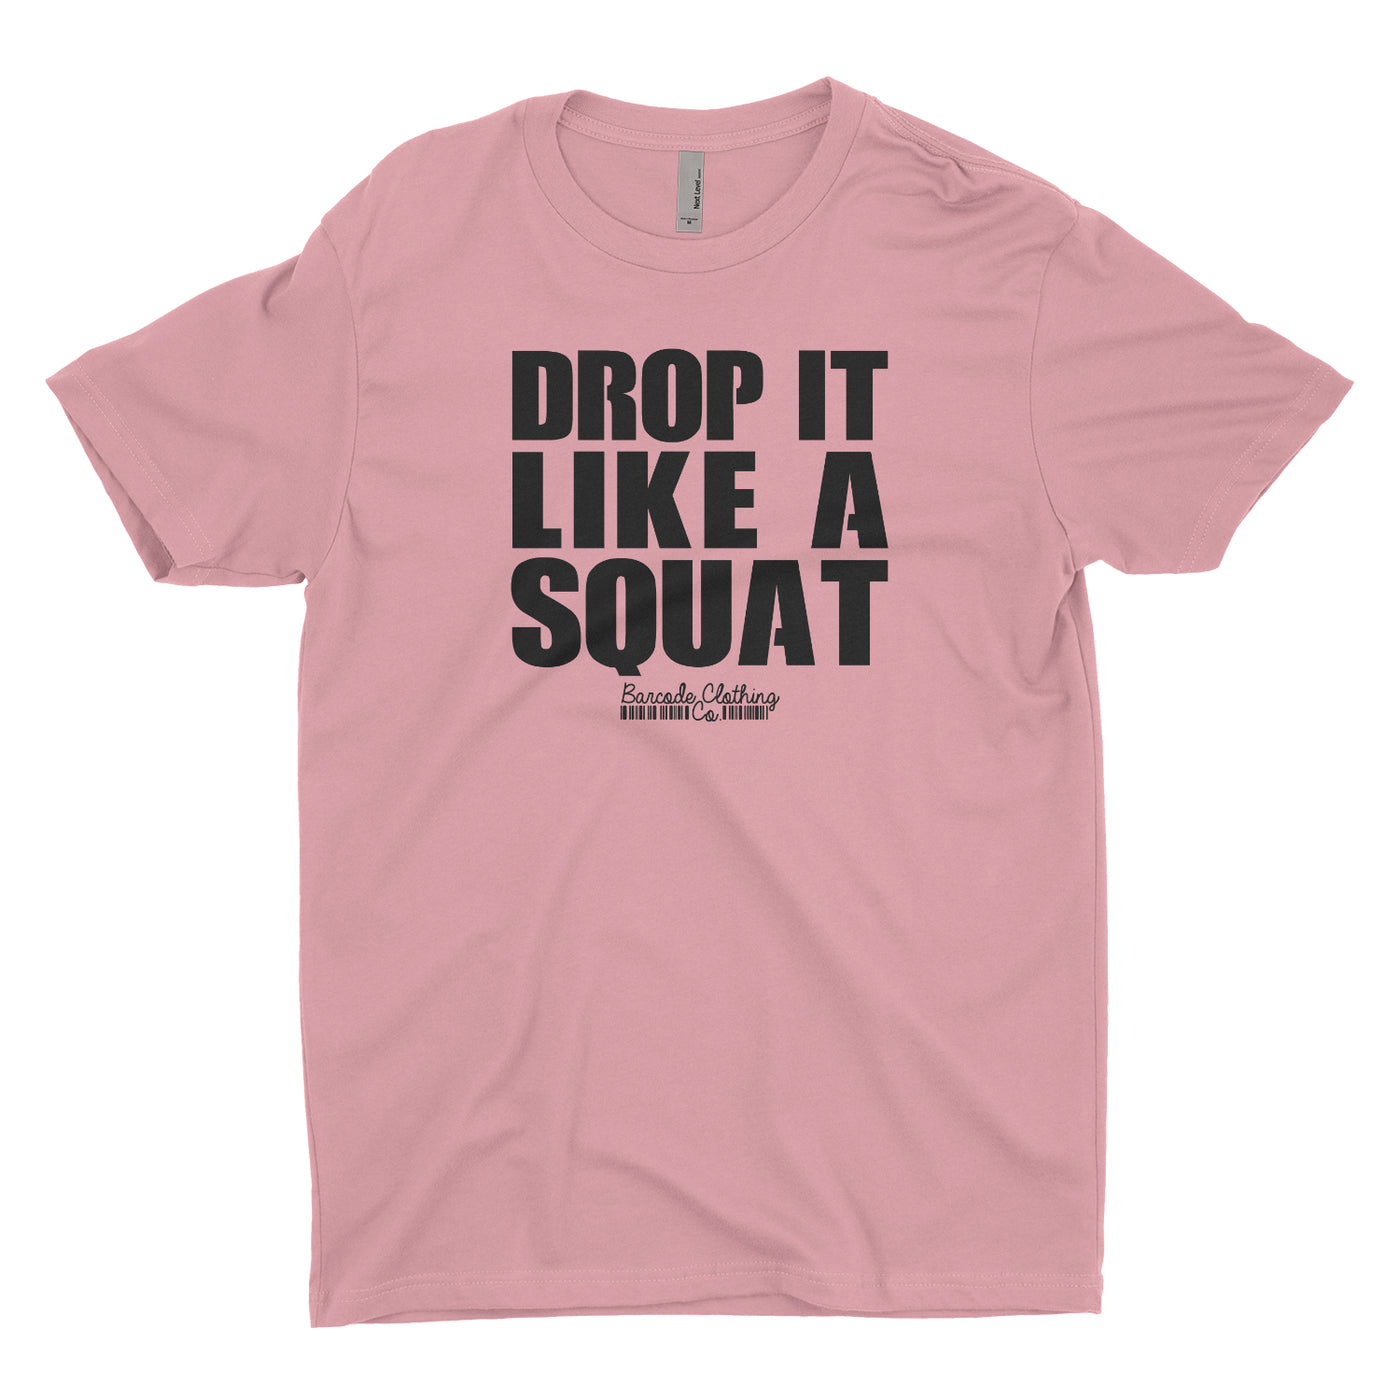 Drop It Like A Squat Blacked Out